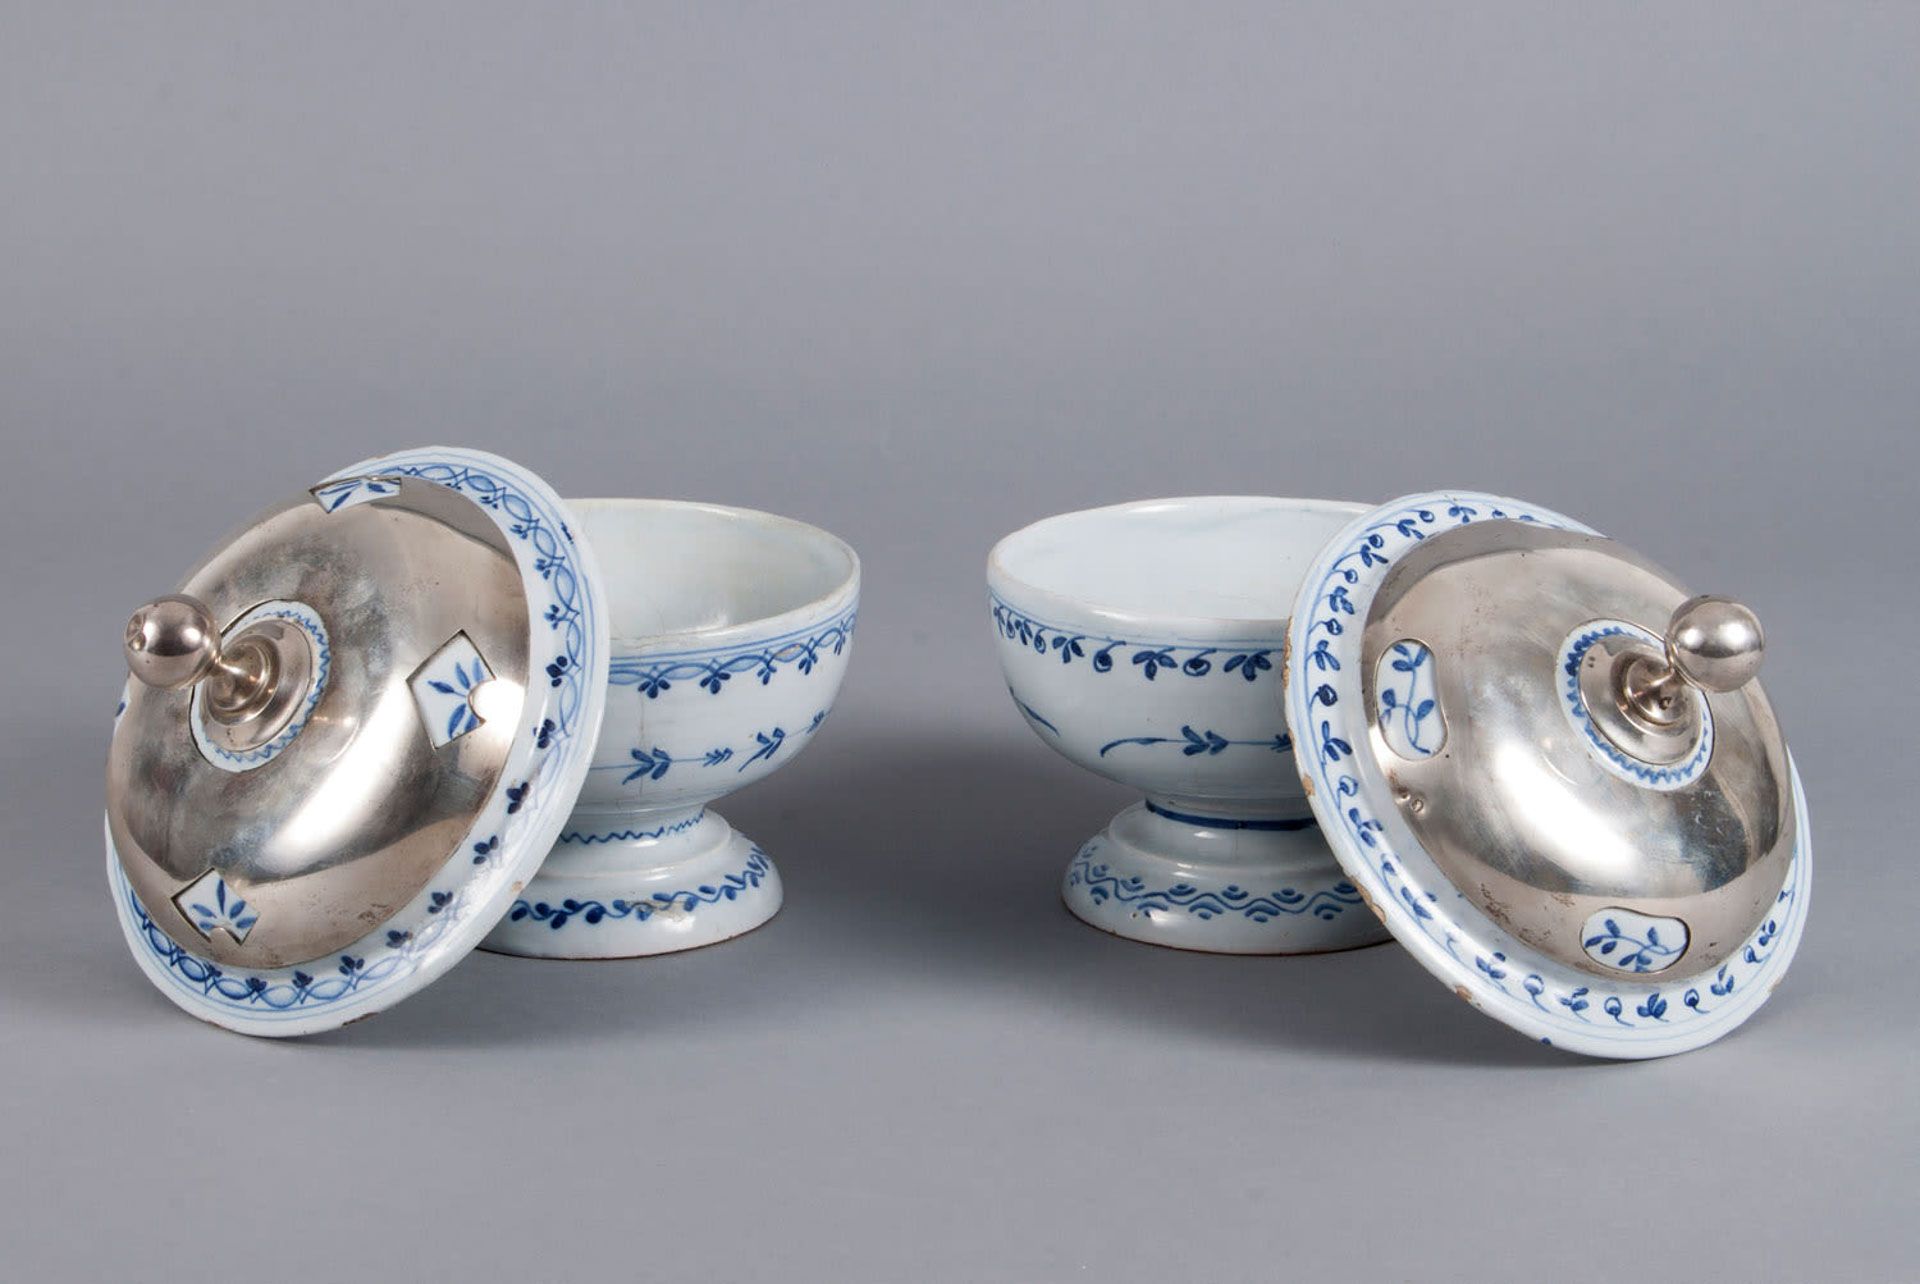 A Pair of Dutch Delft Bowls with Fitted Silver Lids, Portugal, Late 18th Century/Early 19th Century - Bild 3 aus 3